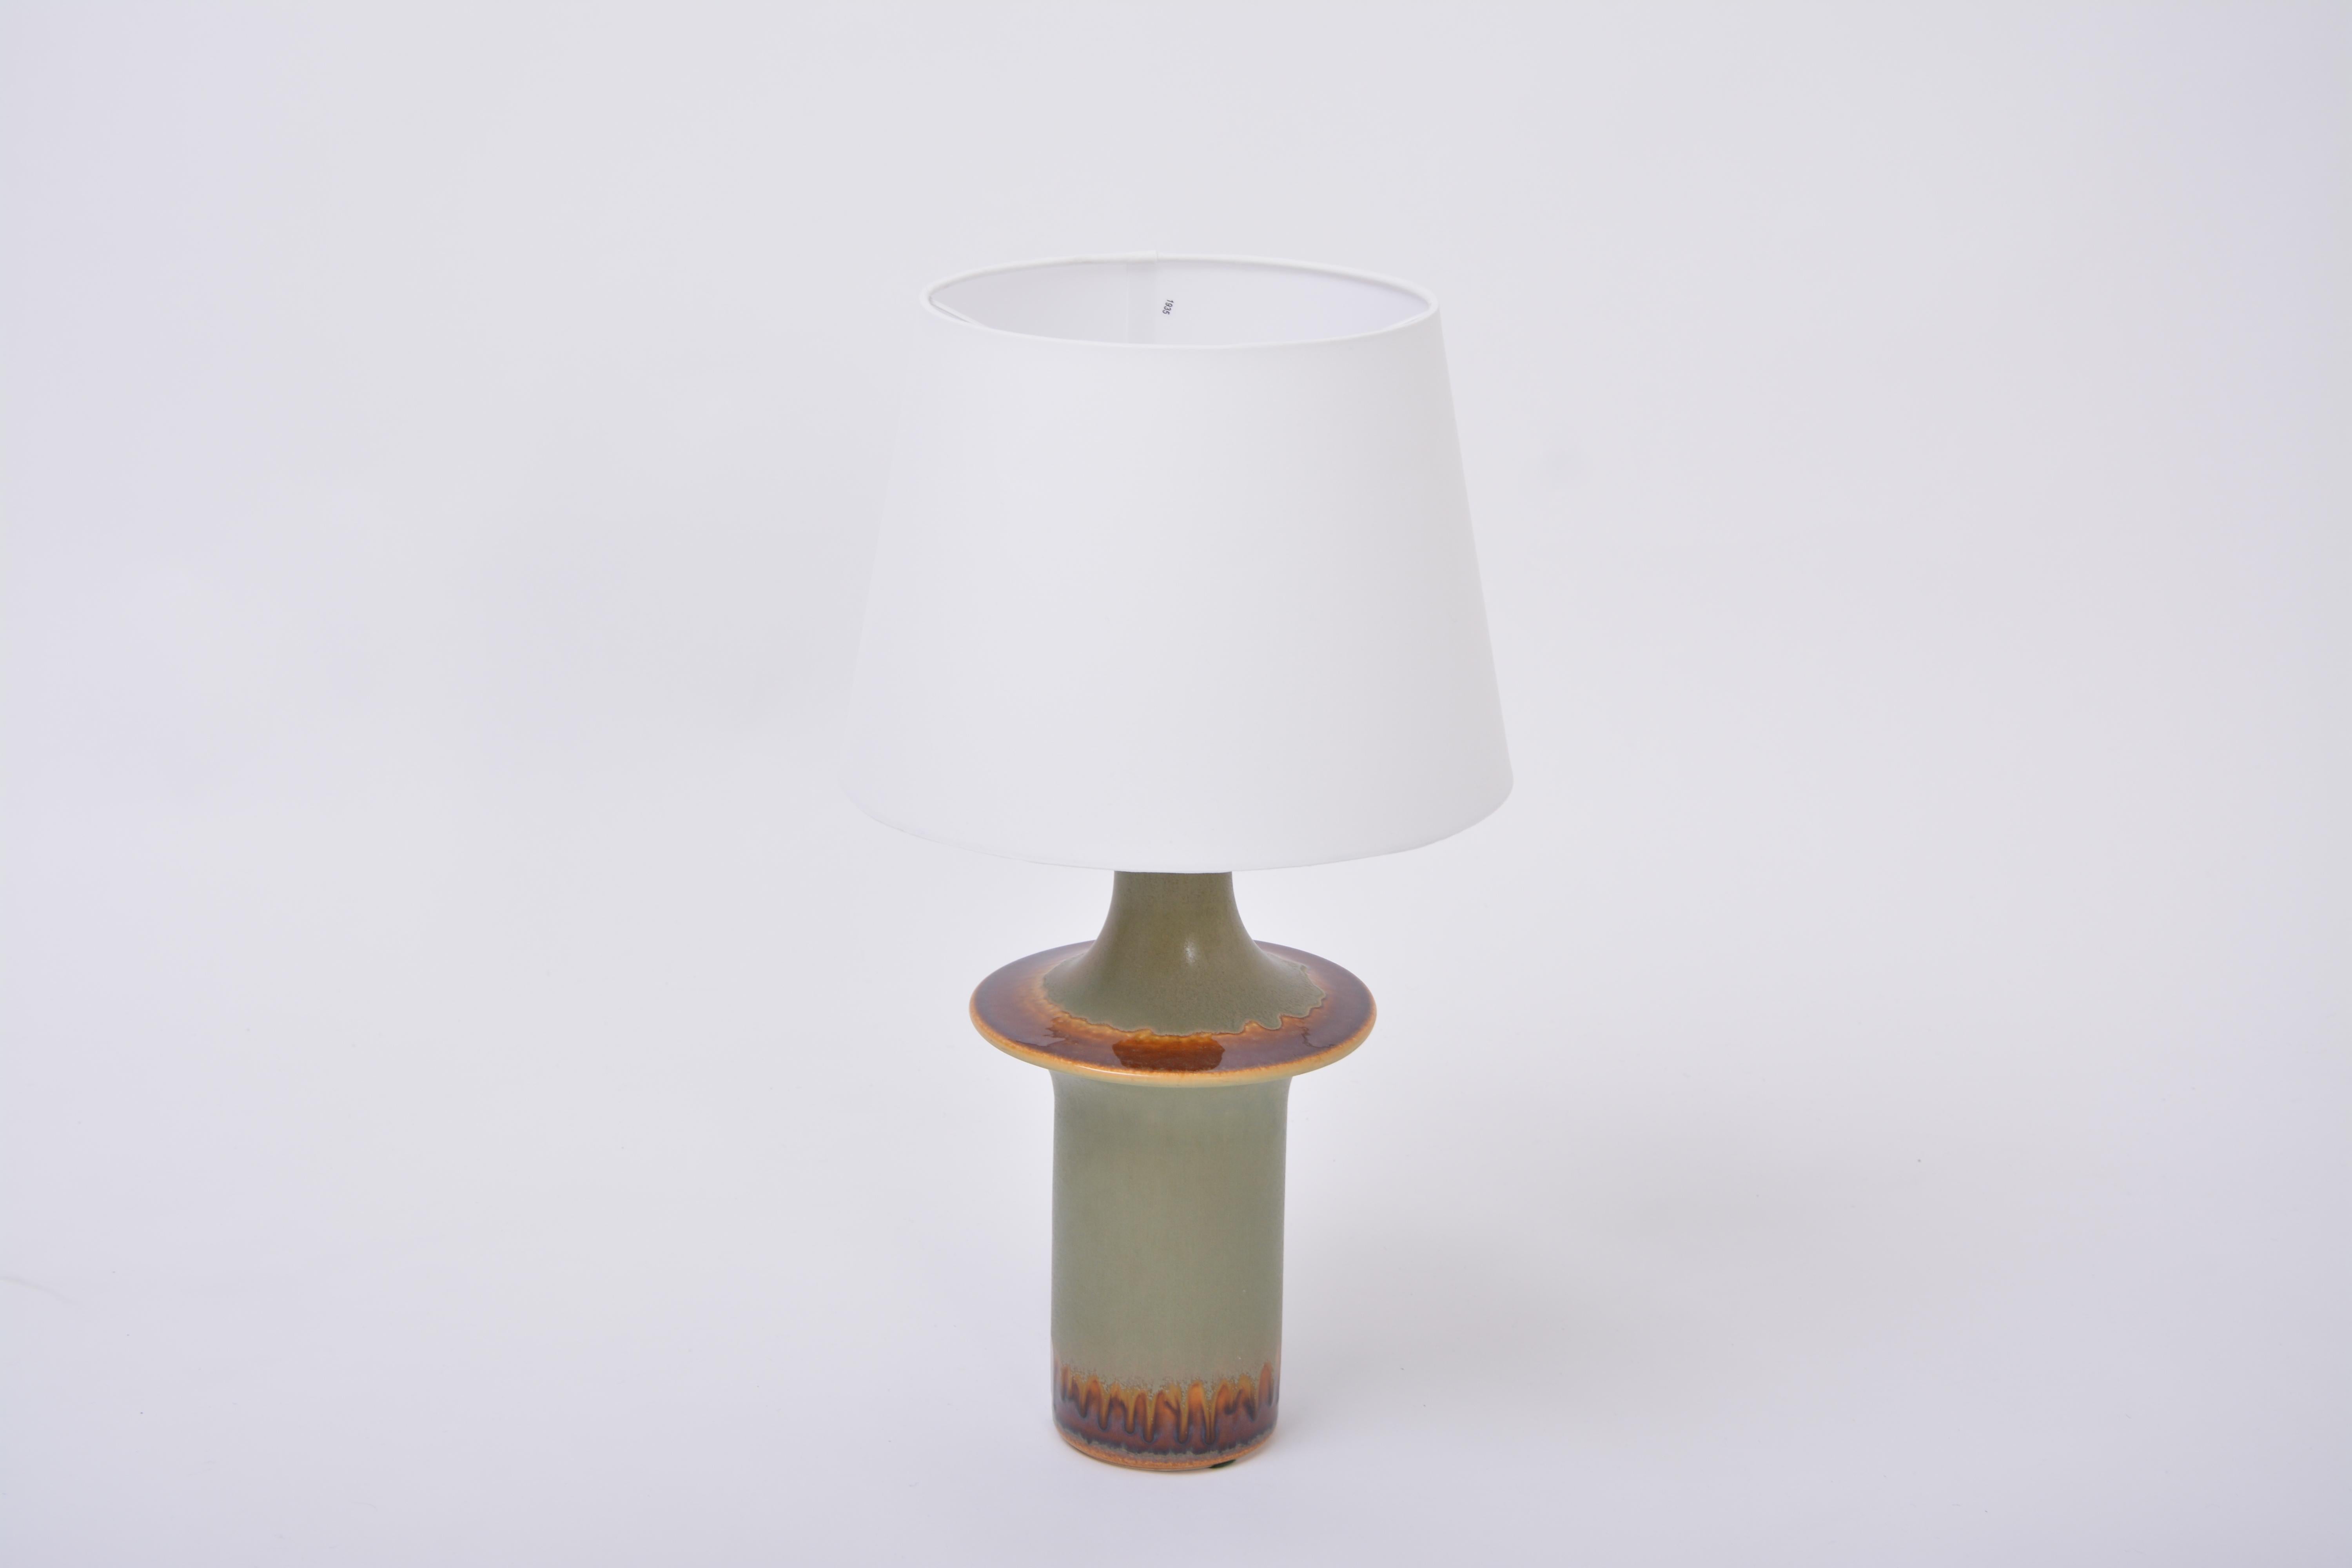 Tall Danish Mid-Century Modern ceramic table lamp by Soholm

Table lamp made of stoneware with ceramic glazing in beautiful tones of bronw and green produced by Soholm Stentoj in Denmark in the 1960s. Measurements of the base are heigt 40 cm and